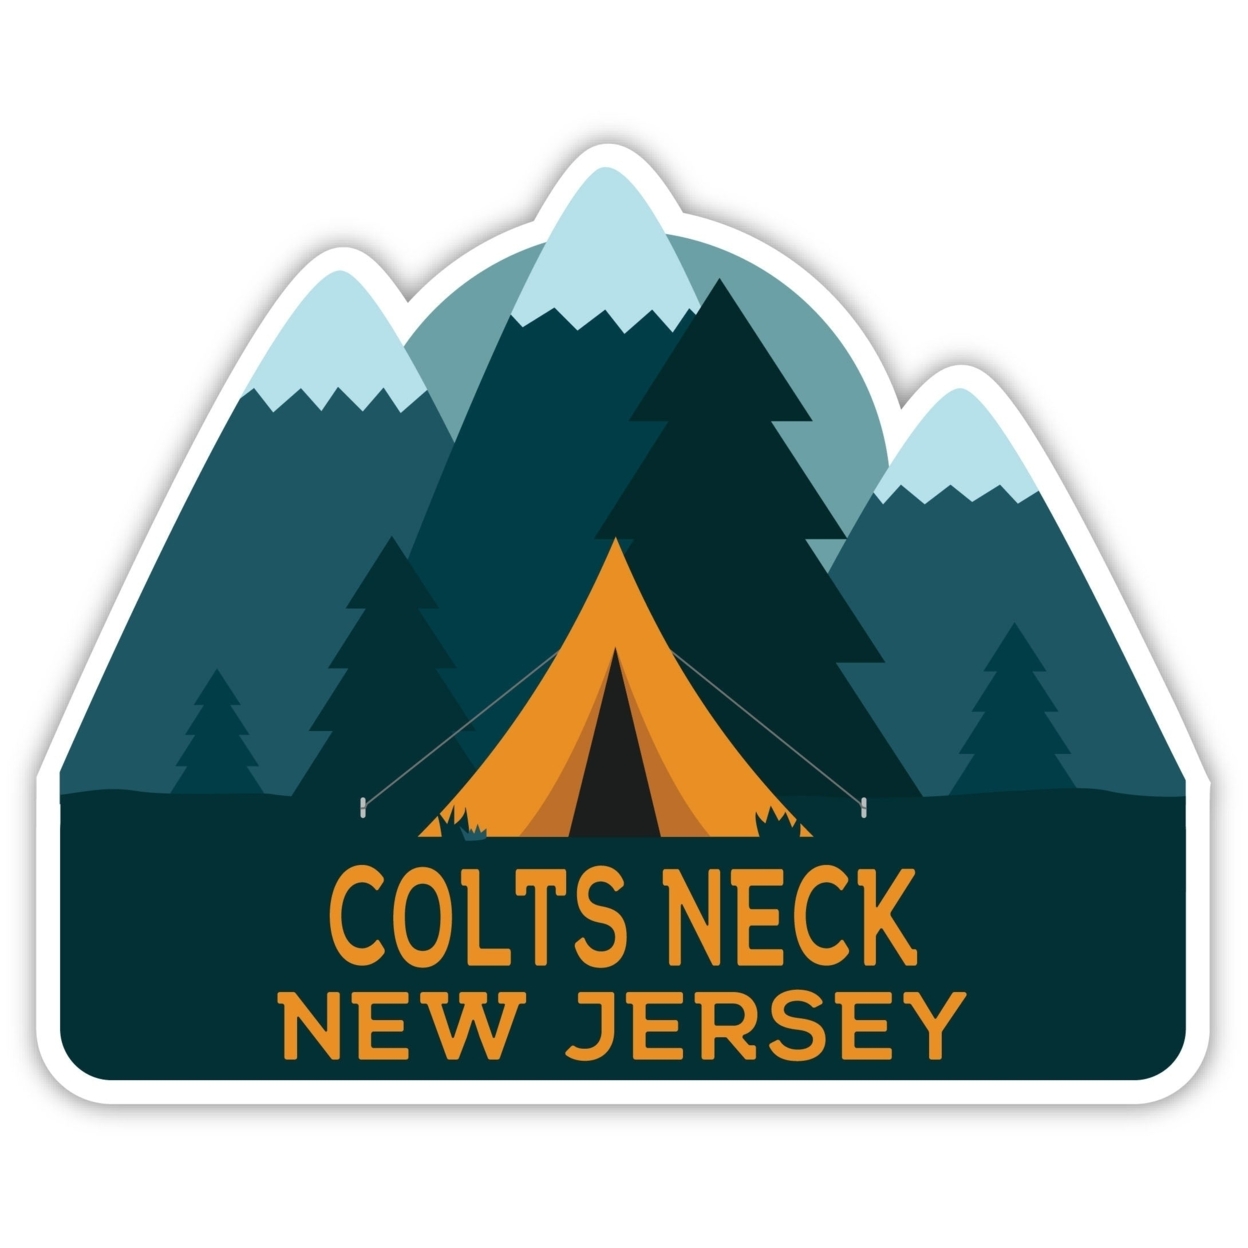 Colts Neck New Jersey Souvenir Decorative Stickers (Choose Theme And Size) - 4-Pack, 4-Inch, Tent